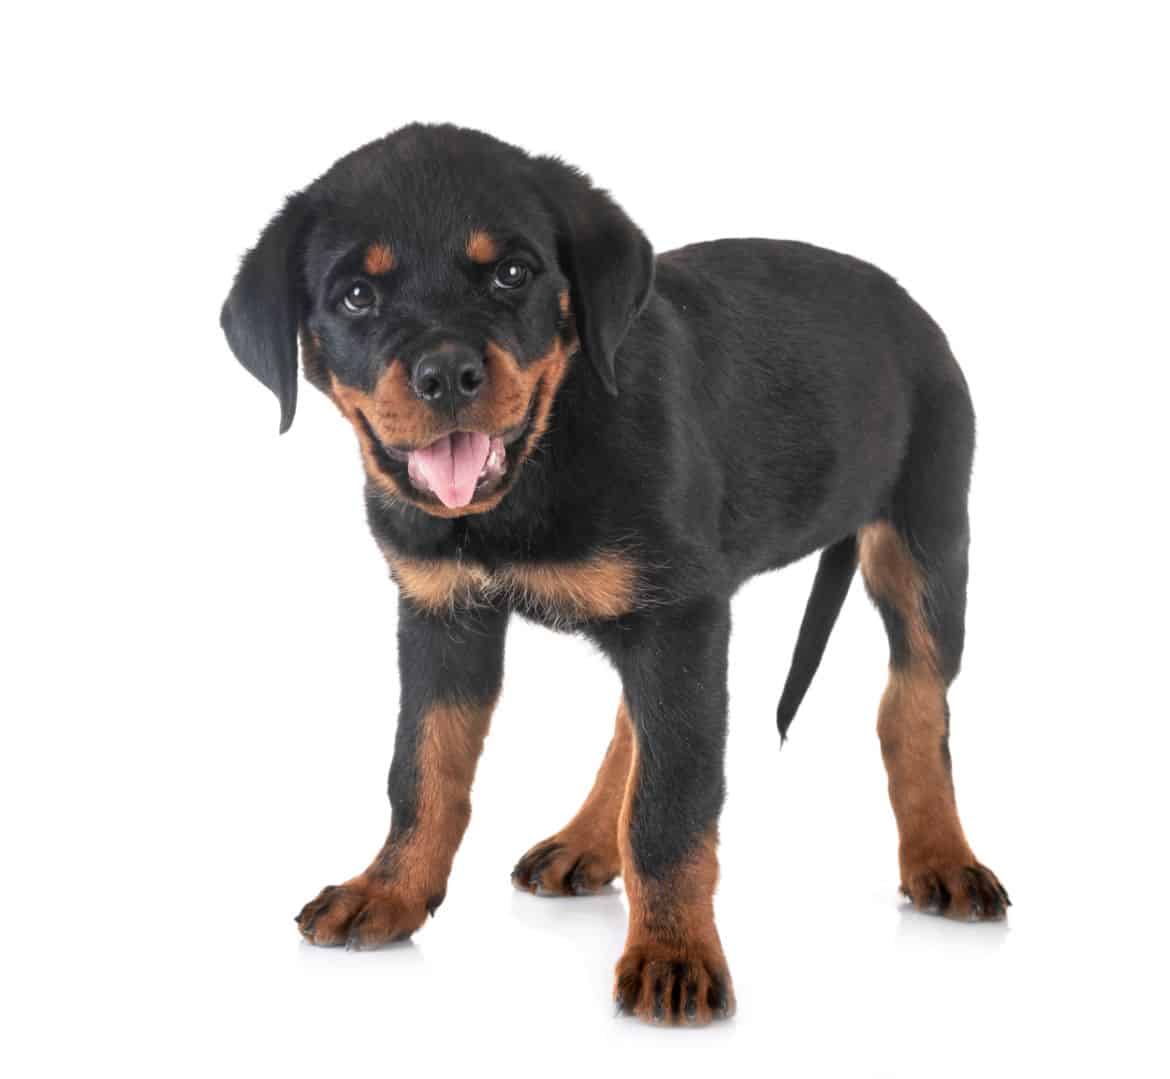 Why does my Rottweiler jump on me?